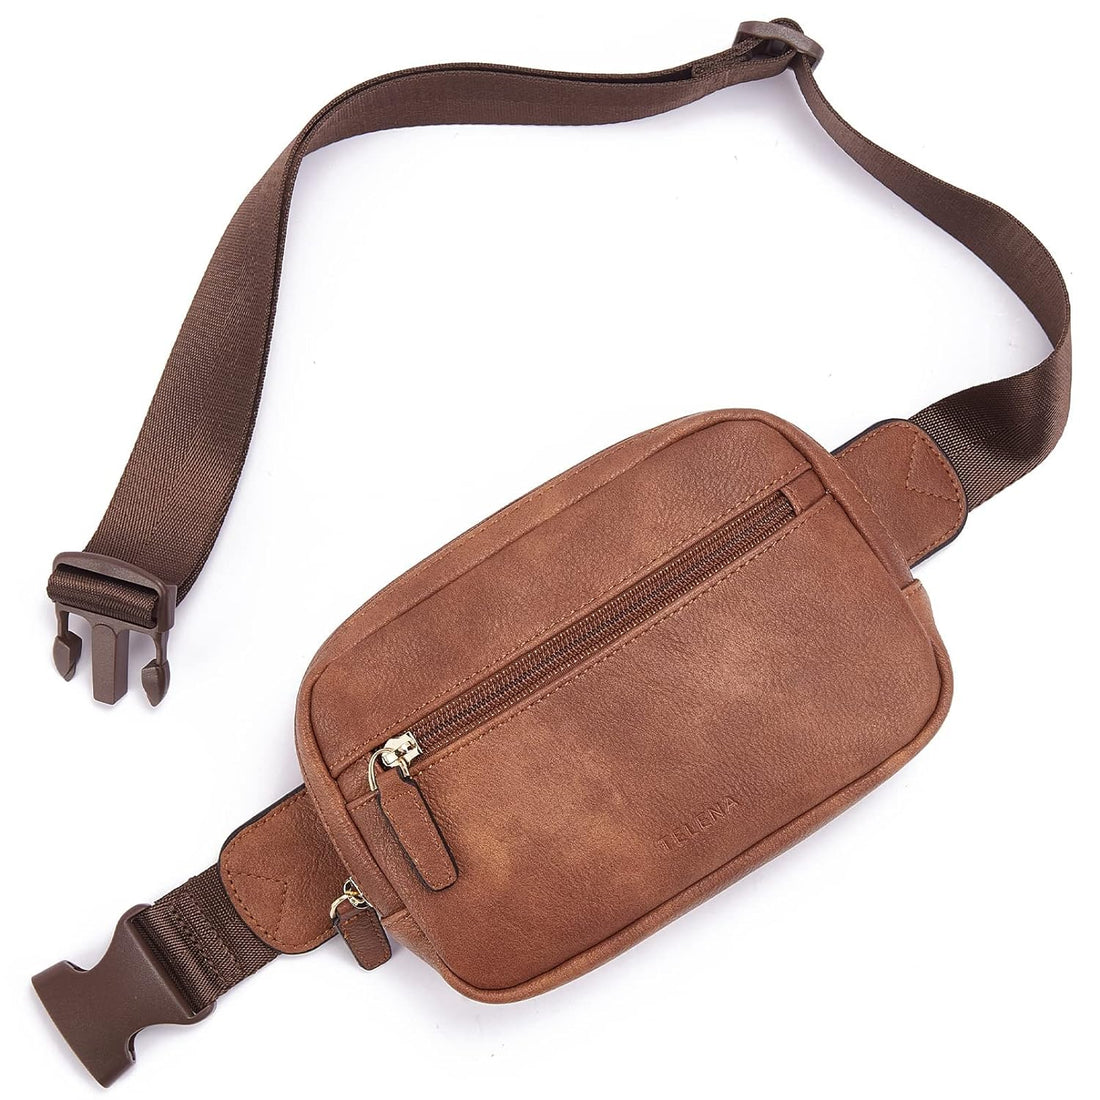 Telena Belt Bag for Women PU Leather Fanny Pack Crossbody Bags for Women Waist Bag with Adjustable Strap, 0-Brown, One Size